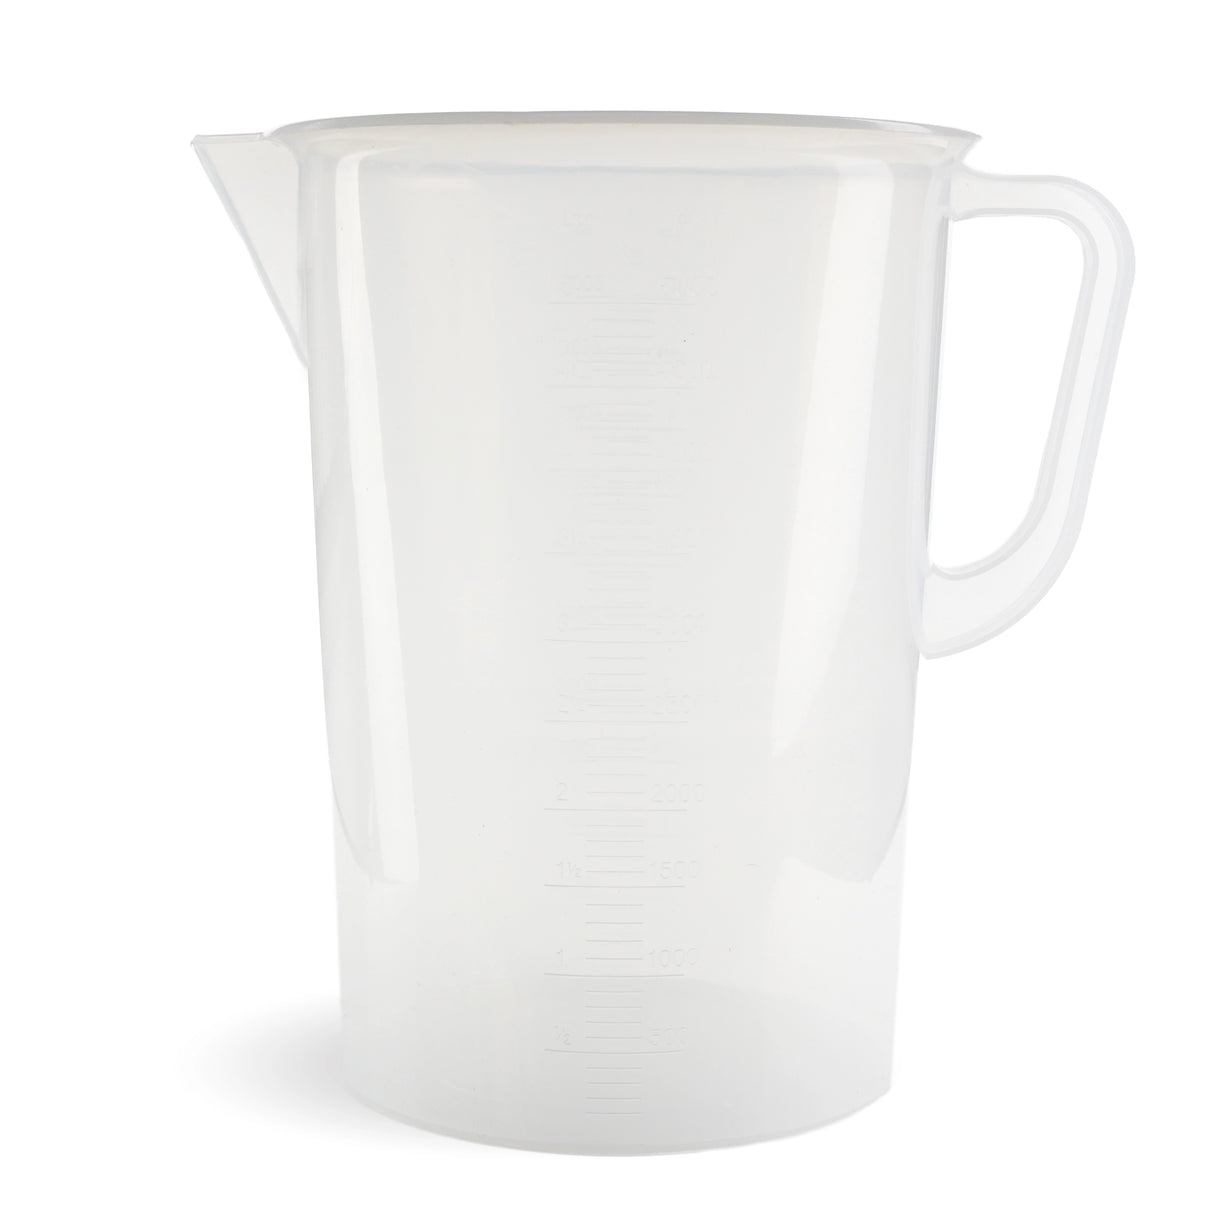 Handled Pouring Pitcher